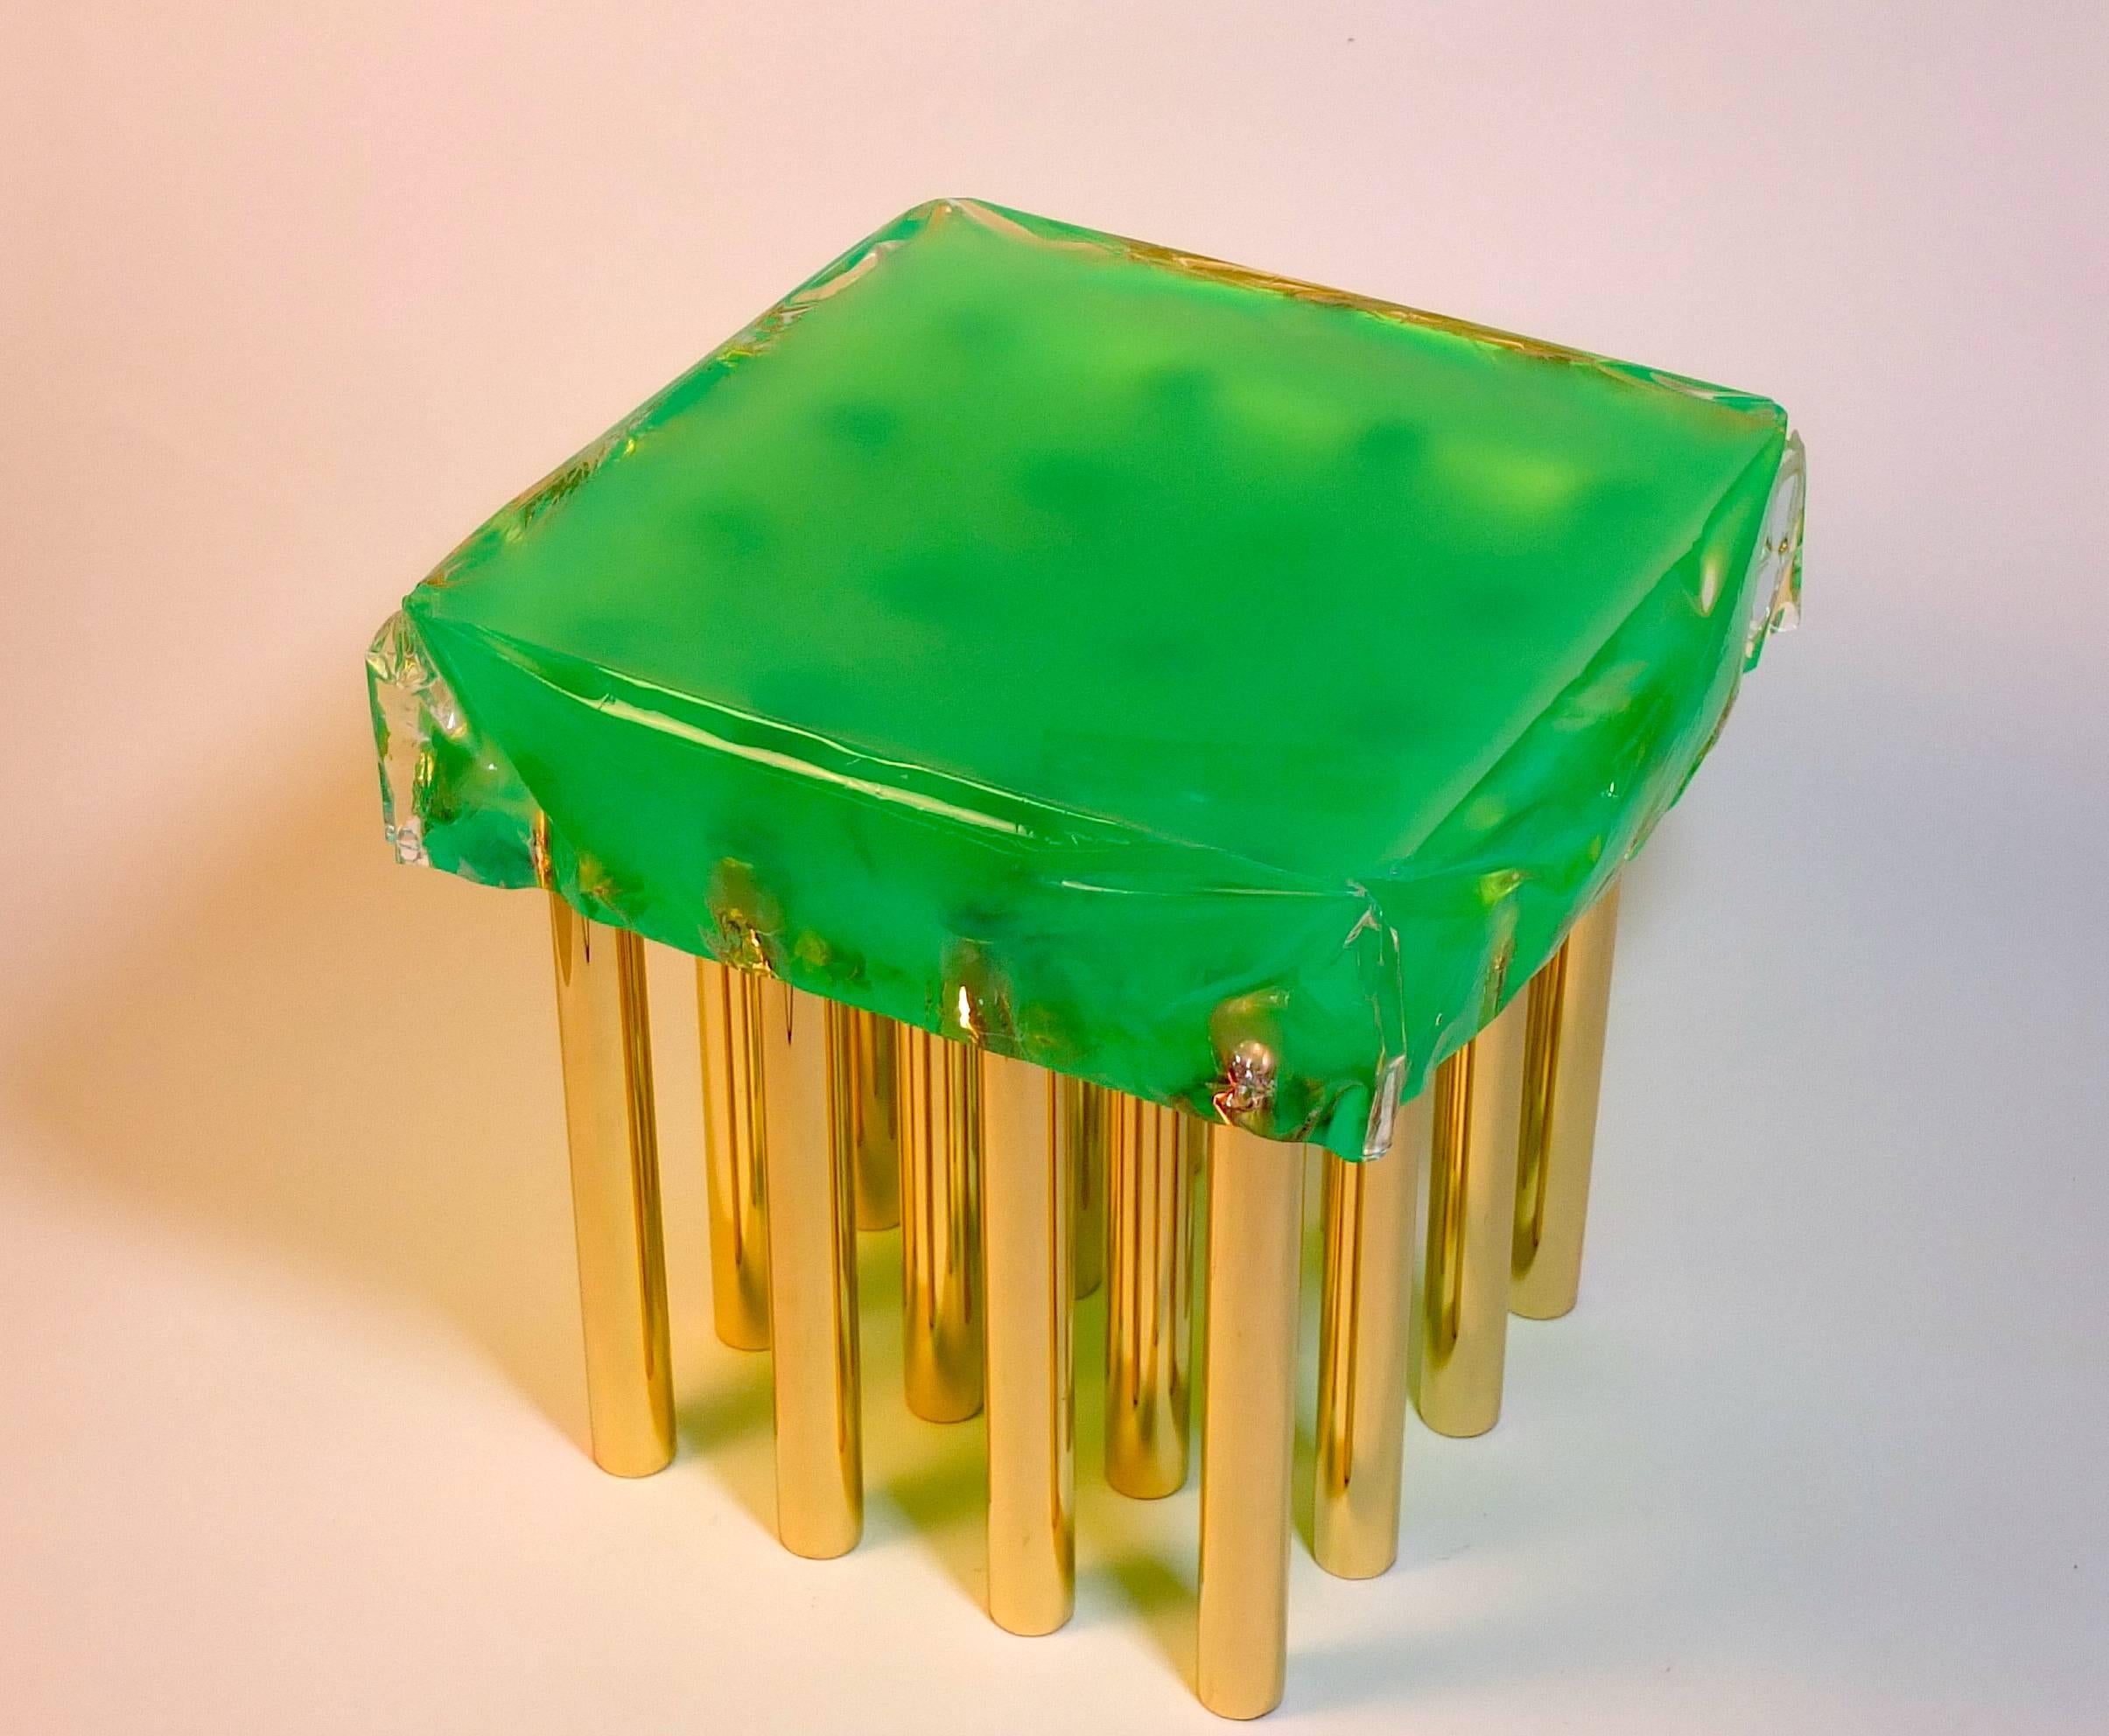 'Mou' coffee table in fluorescent green plexiglass with brass legs designed and produced by Studio Superego.

Biography
Superego Editions was born in 2006, performing a constant activity of research in decorative arts by offering both contemporary